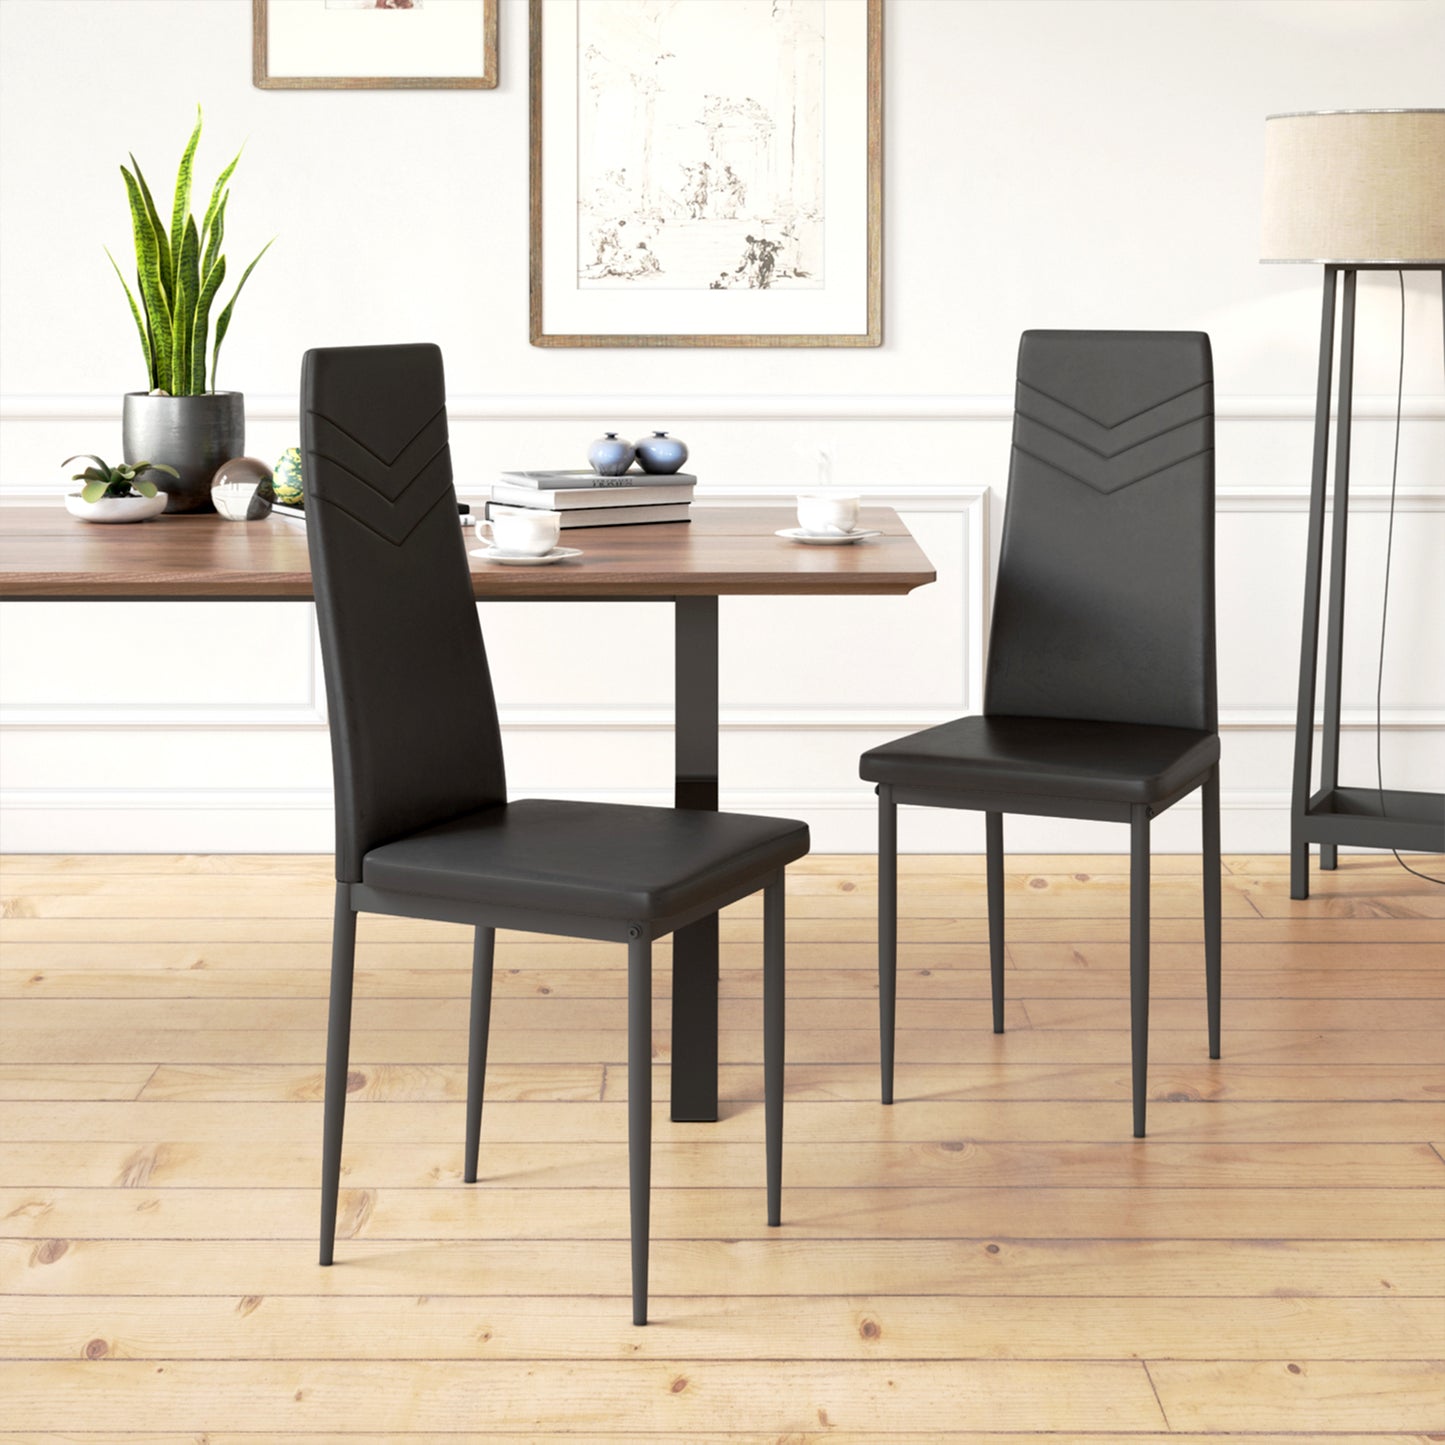 ANN-V Upholstered Dining Chair with Iron Legs - Black